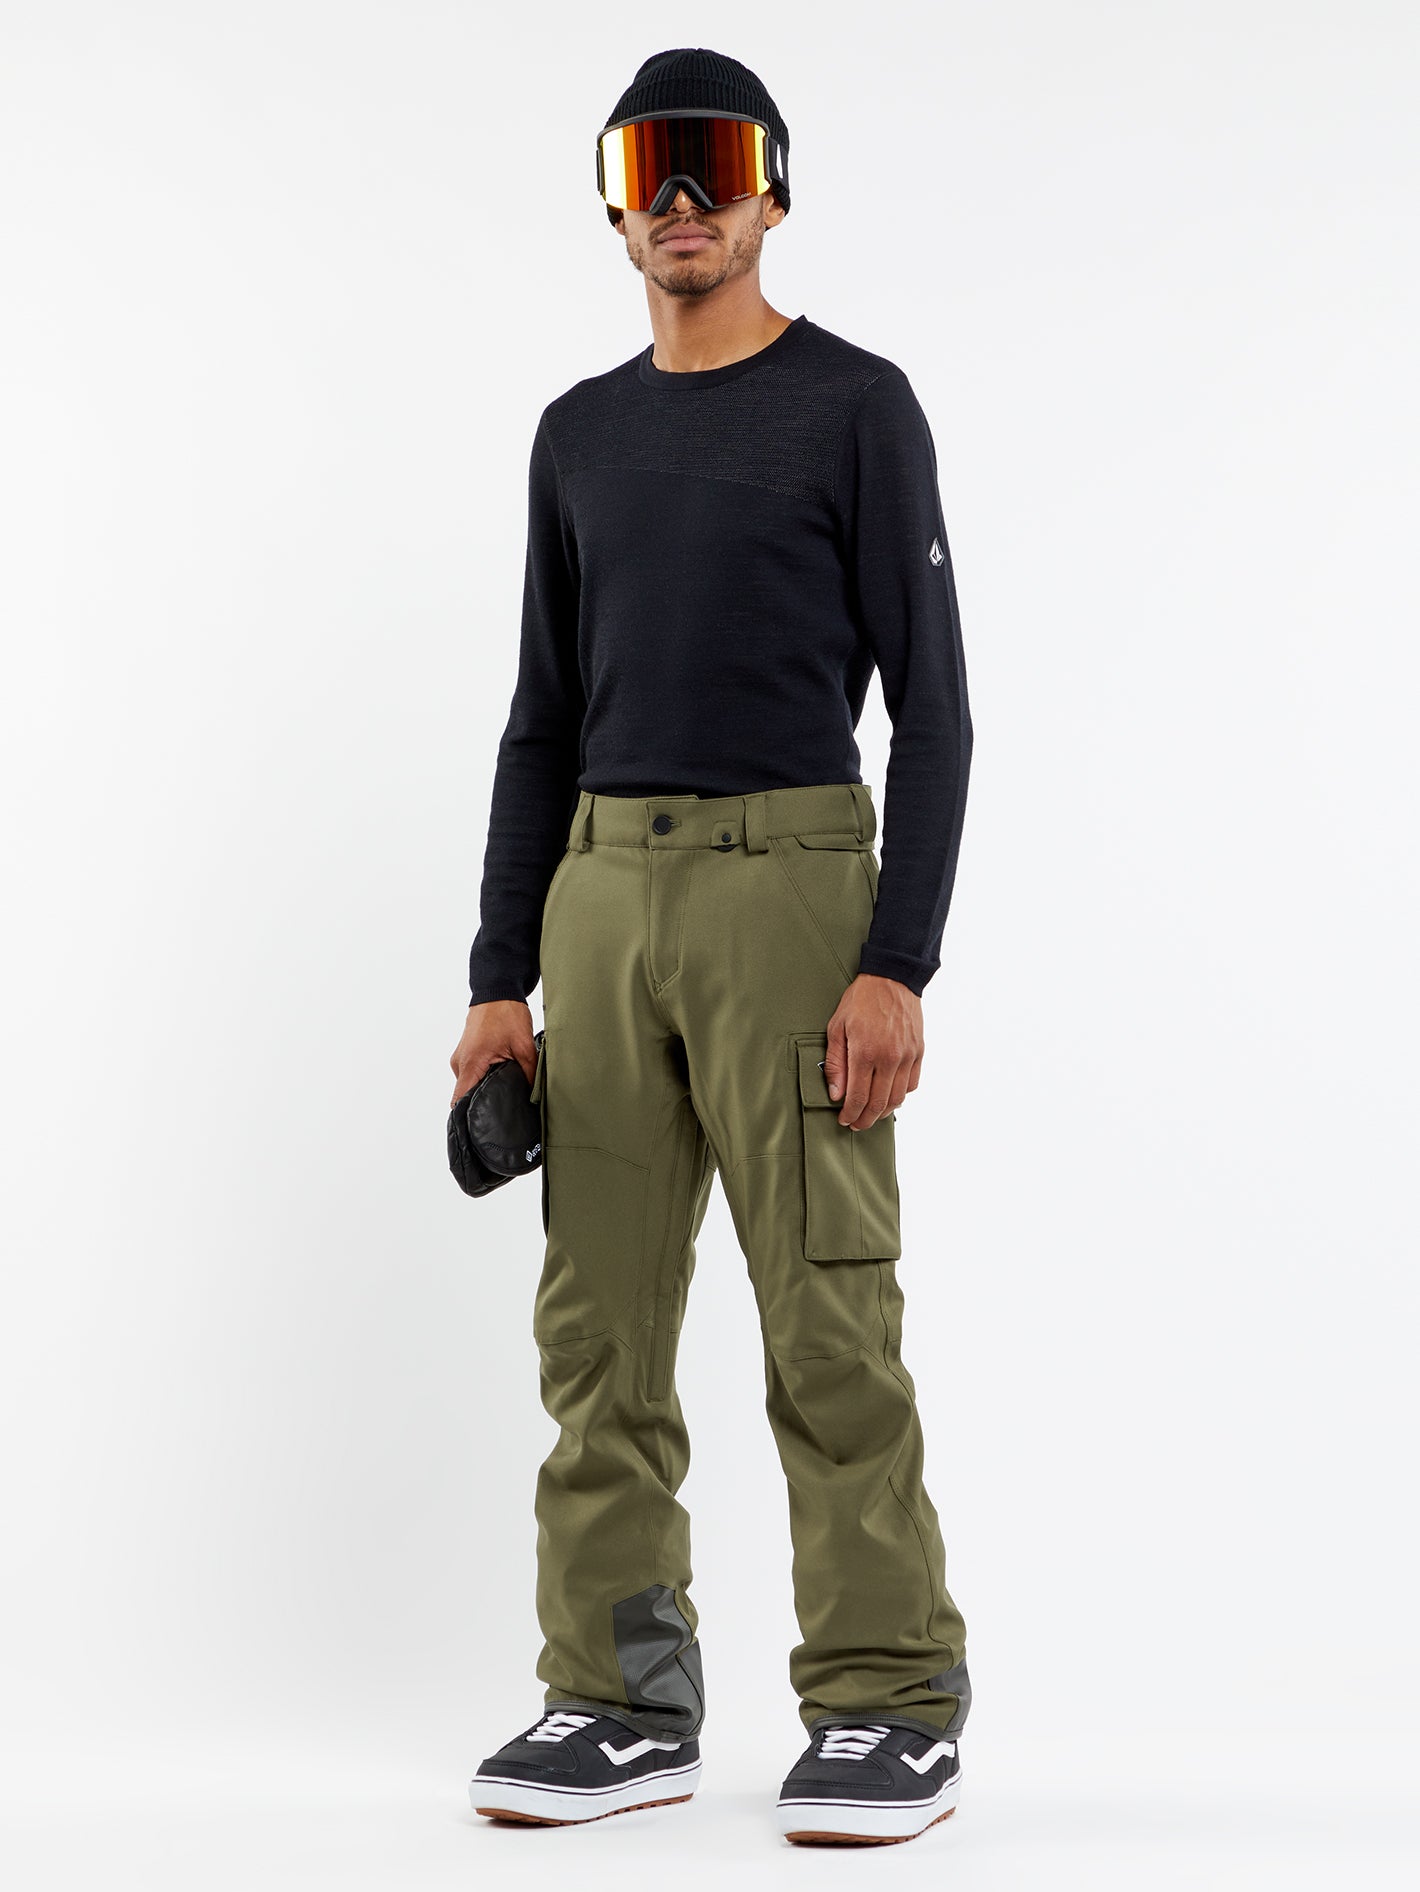 Mens New Articulated Pants - Military